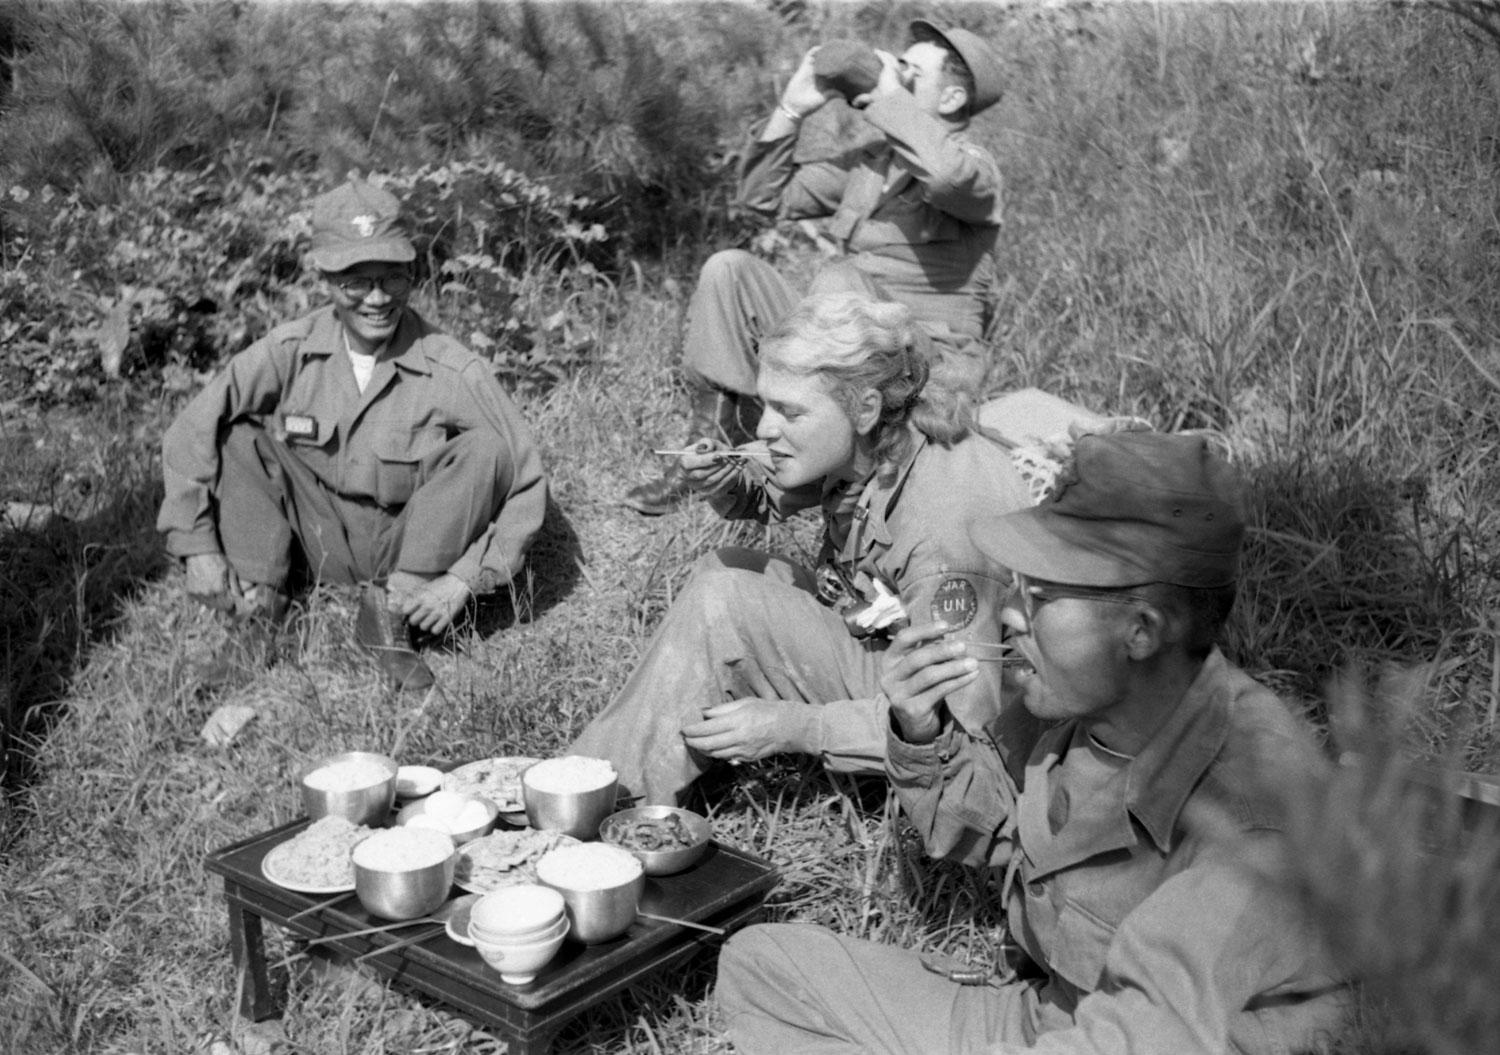 LIFE's Margaret Bourke-White shares a meal with South Korean troops in the field, 1952.